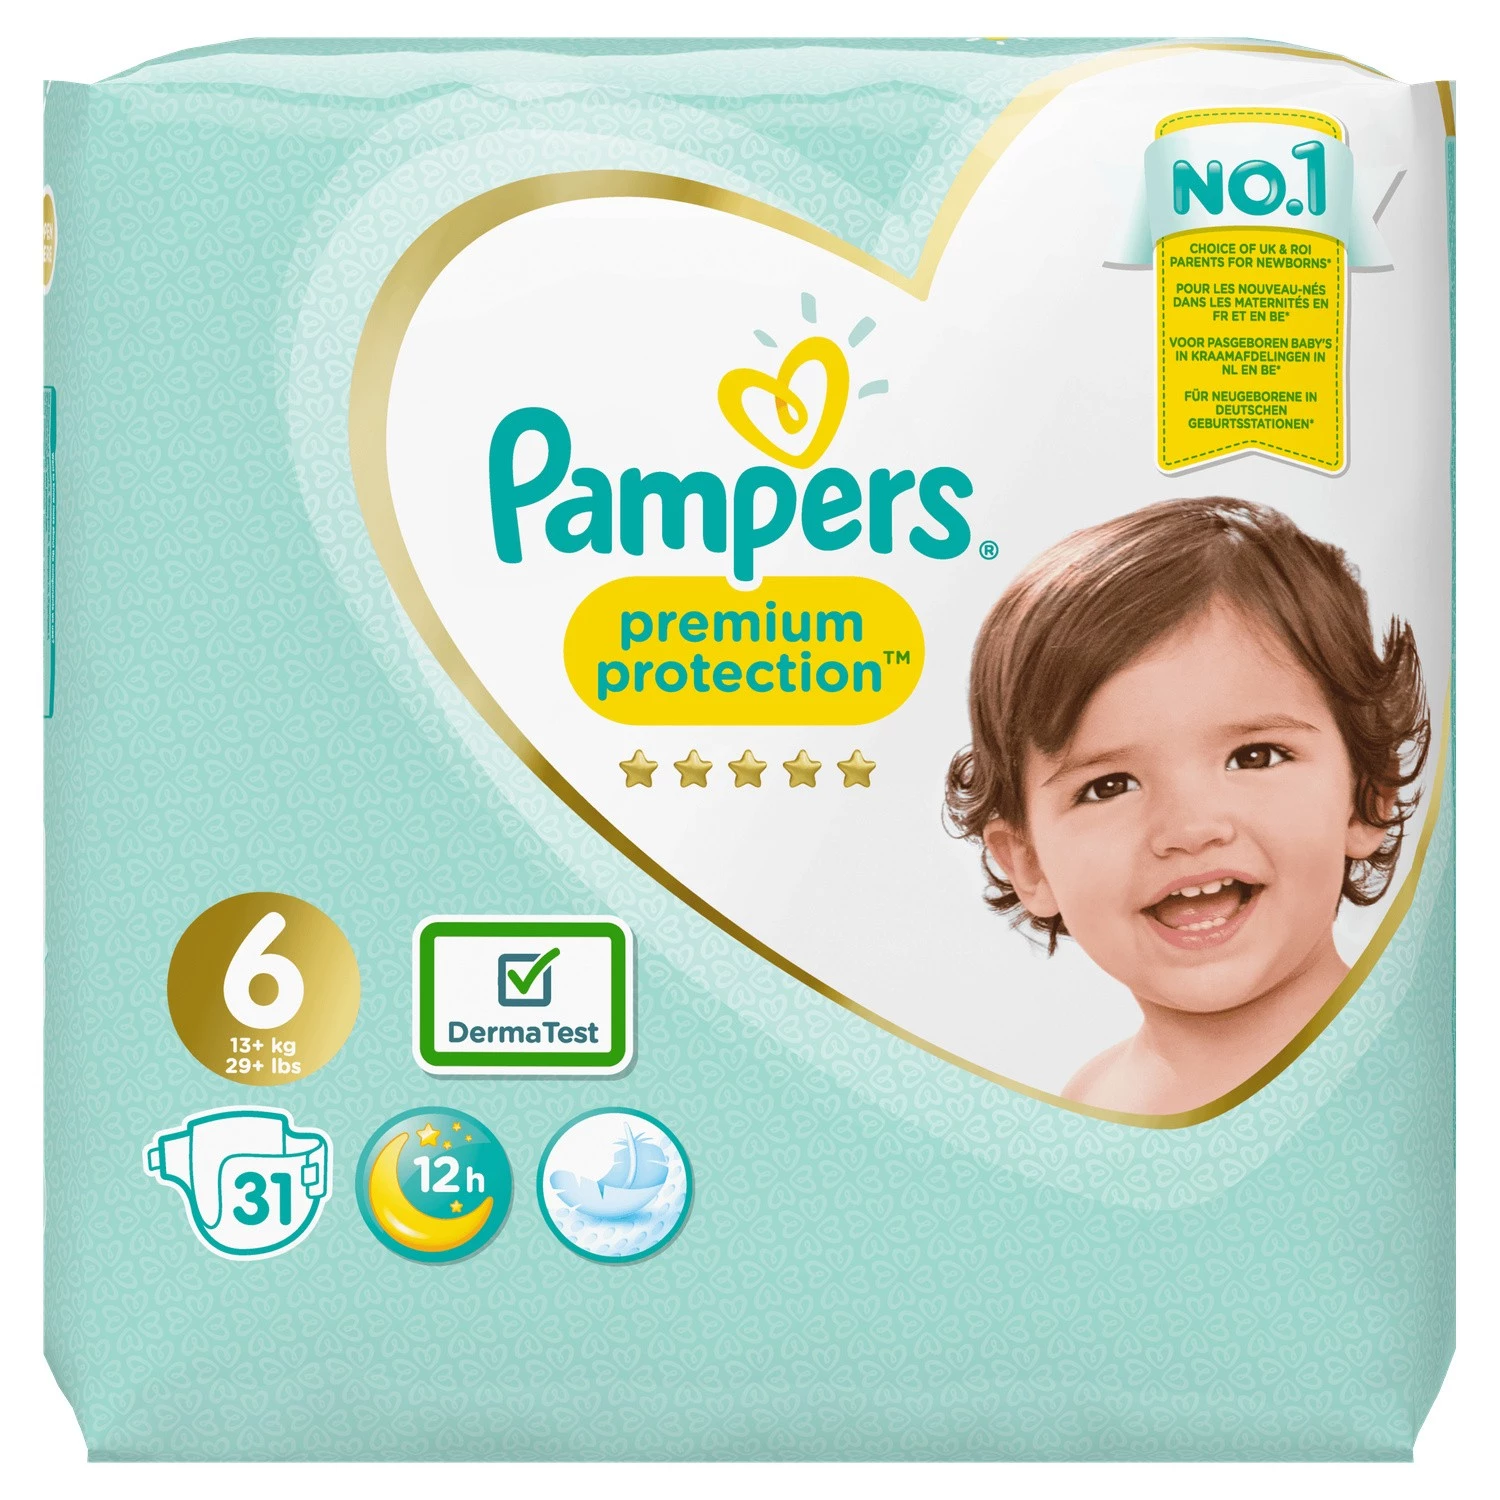 Pampers Prem Protect T6x31